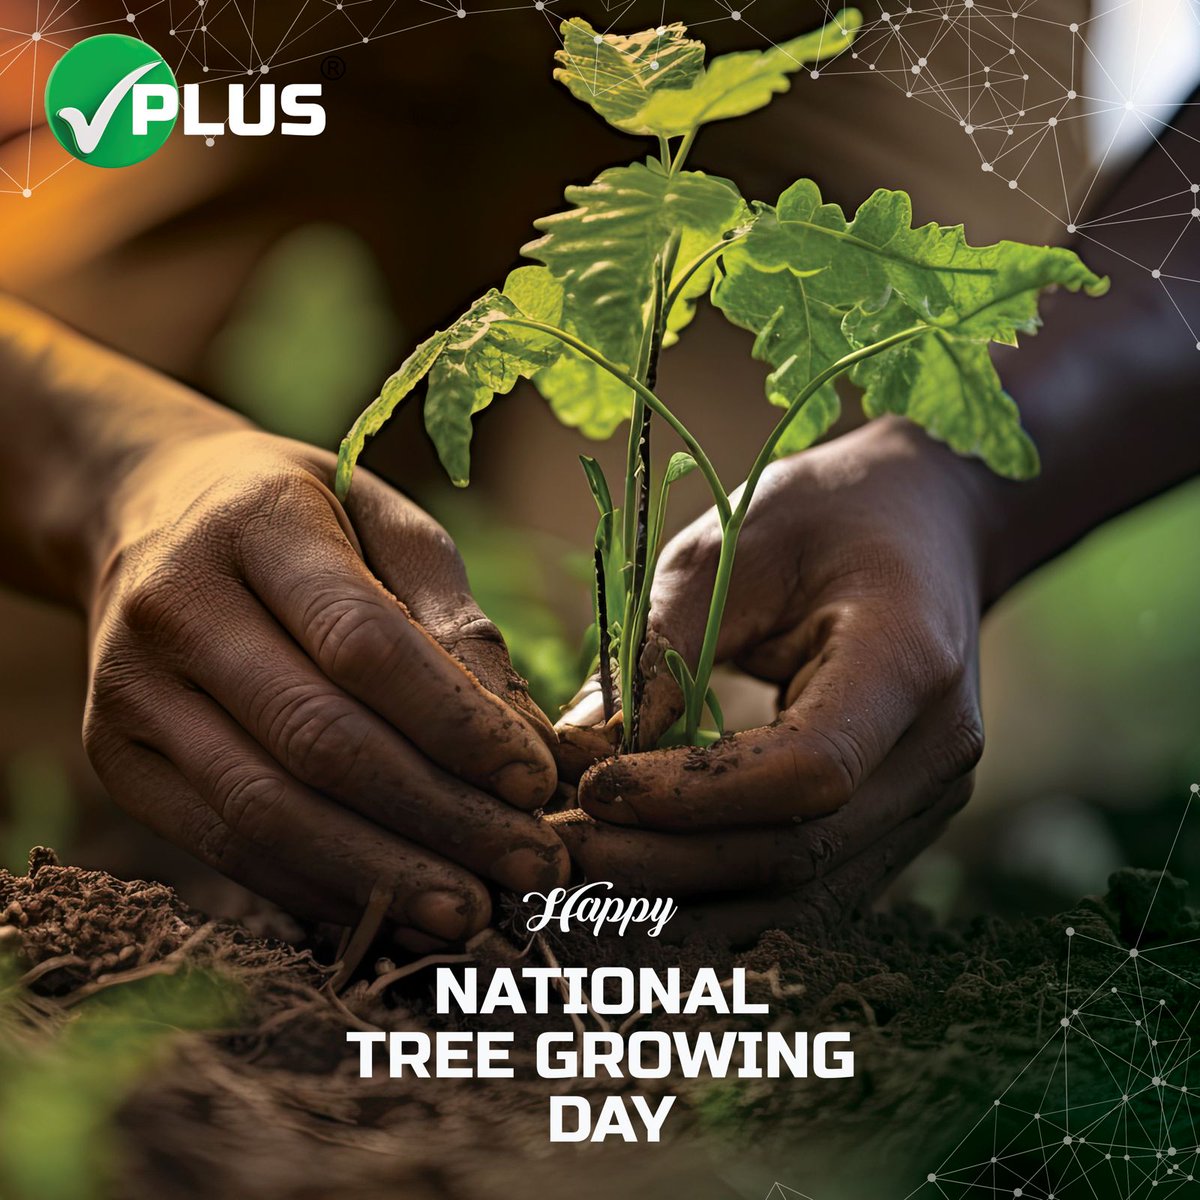 Let's celebrate our planet by getting our hands dirty and planting trees today! 🌱  Every tree planted is a step towards a greener, healthier future for generations to come.#TreePlantingDay #GreenEarth #SustainableLiving 🌍.